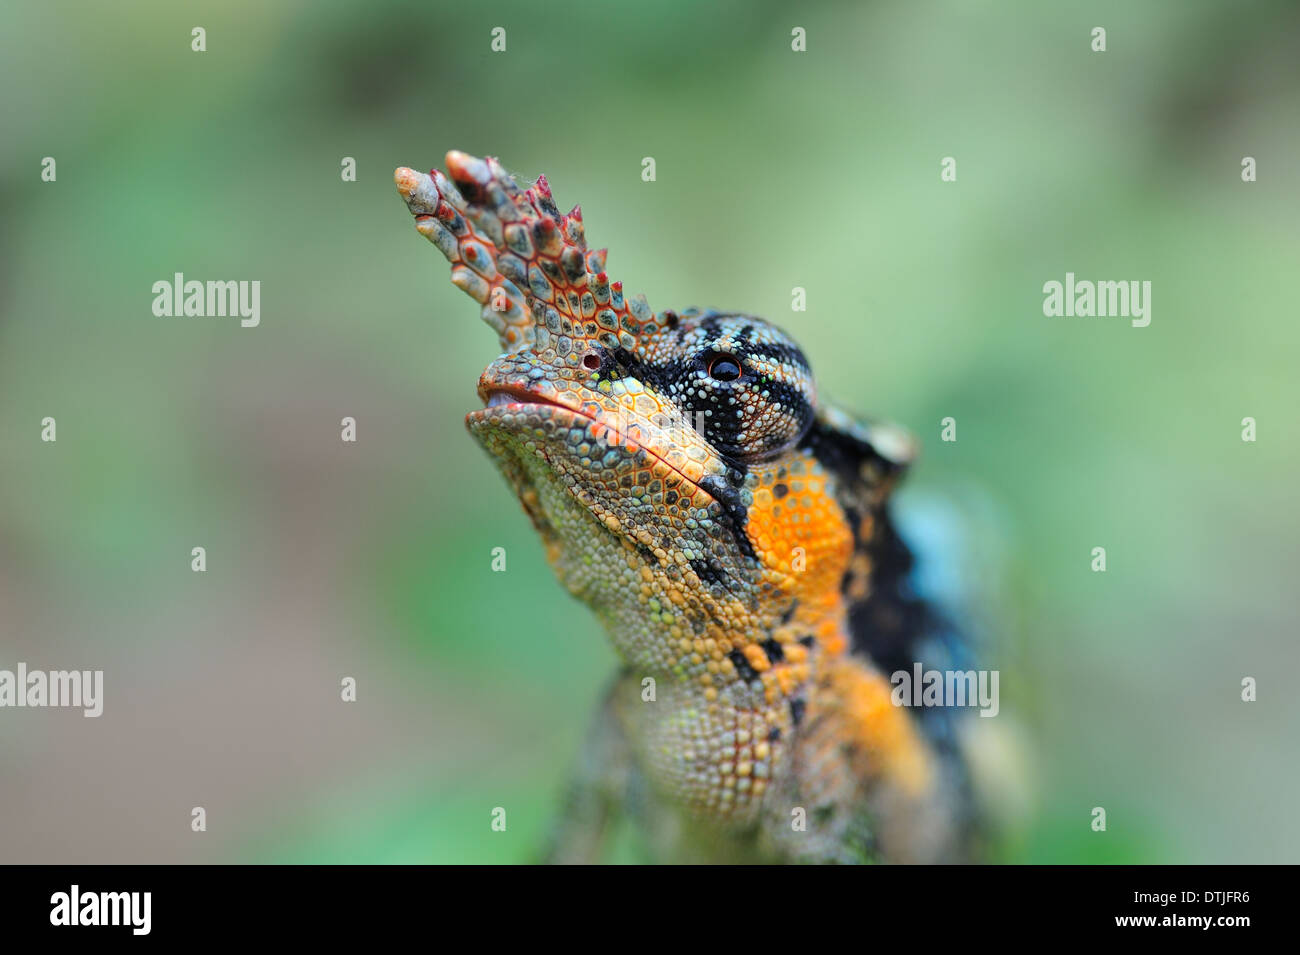 Two-horned chameleon (close up) Stock Photo